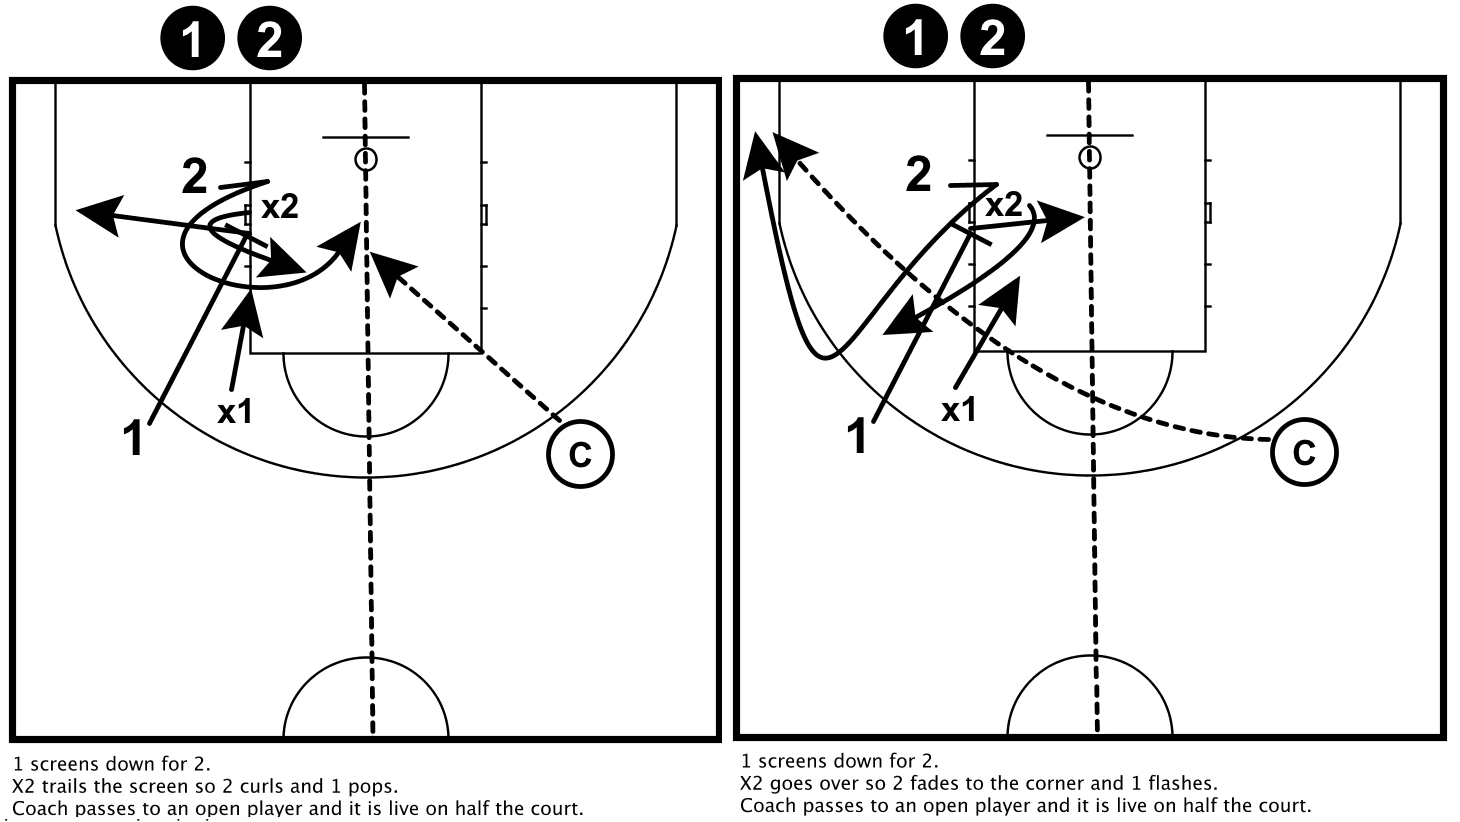 drills-pin-down-golden-state